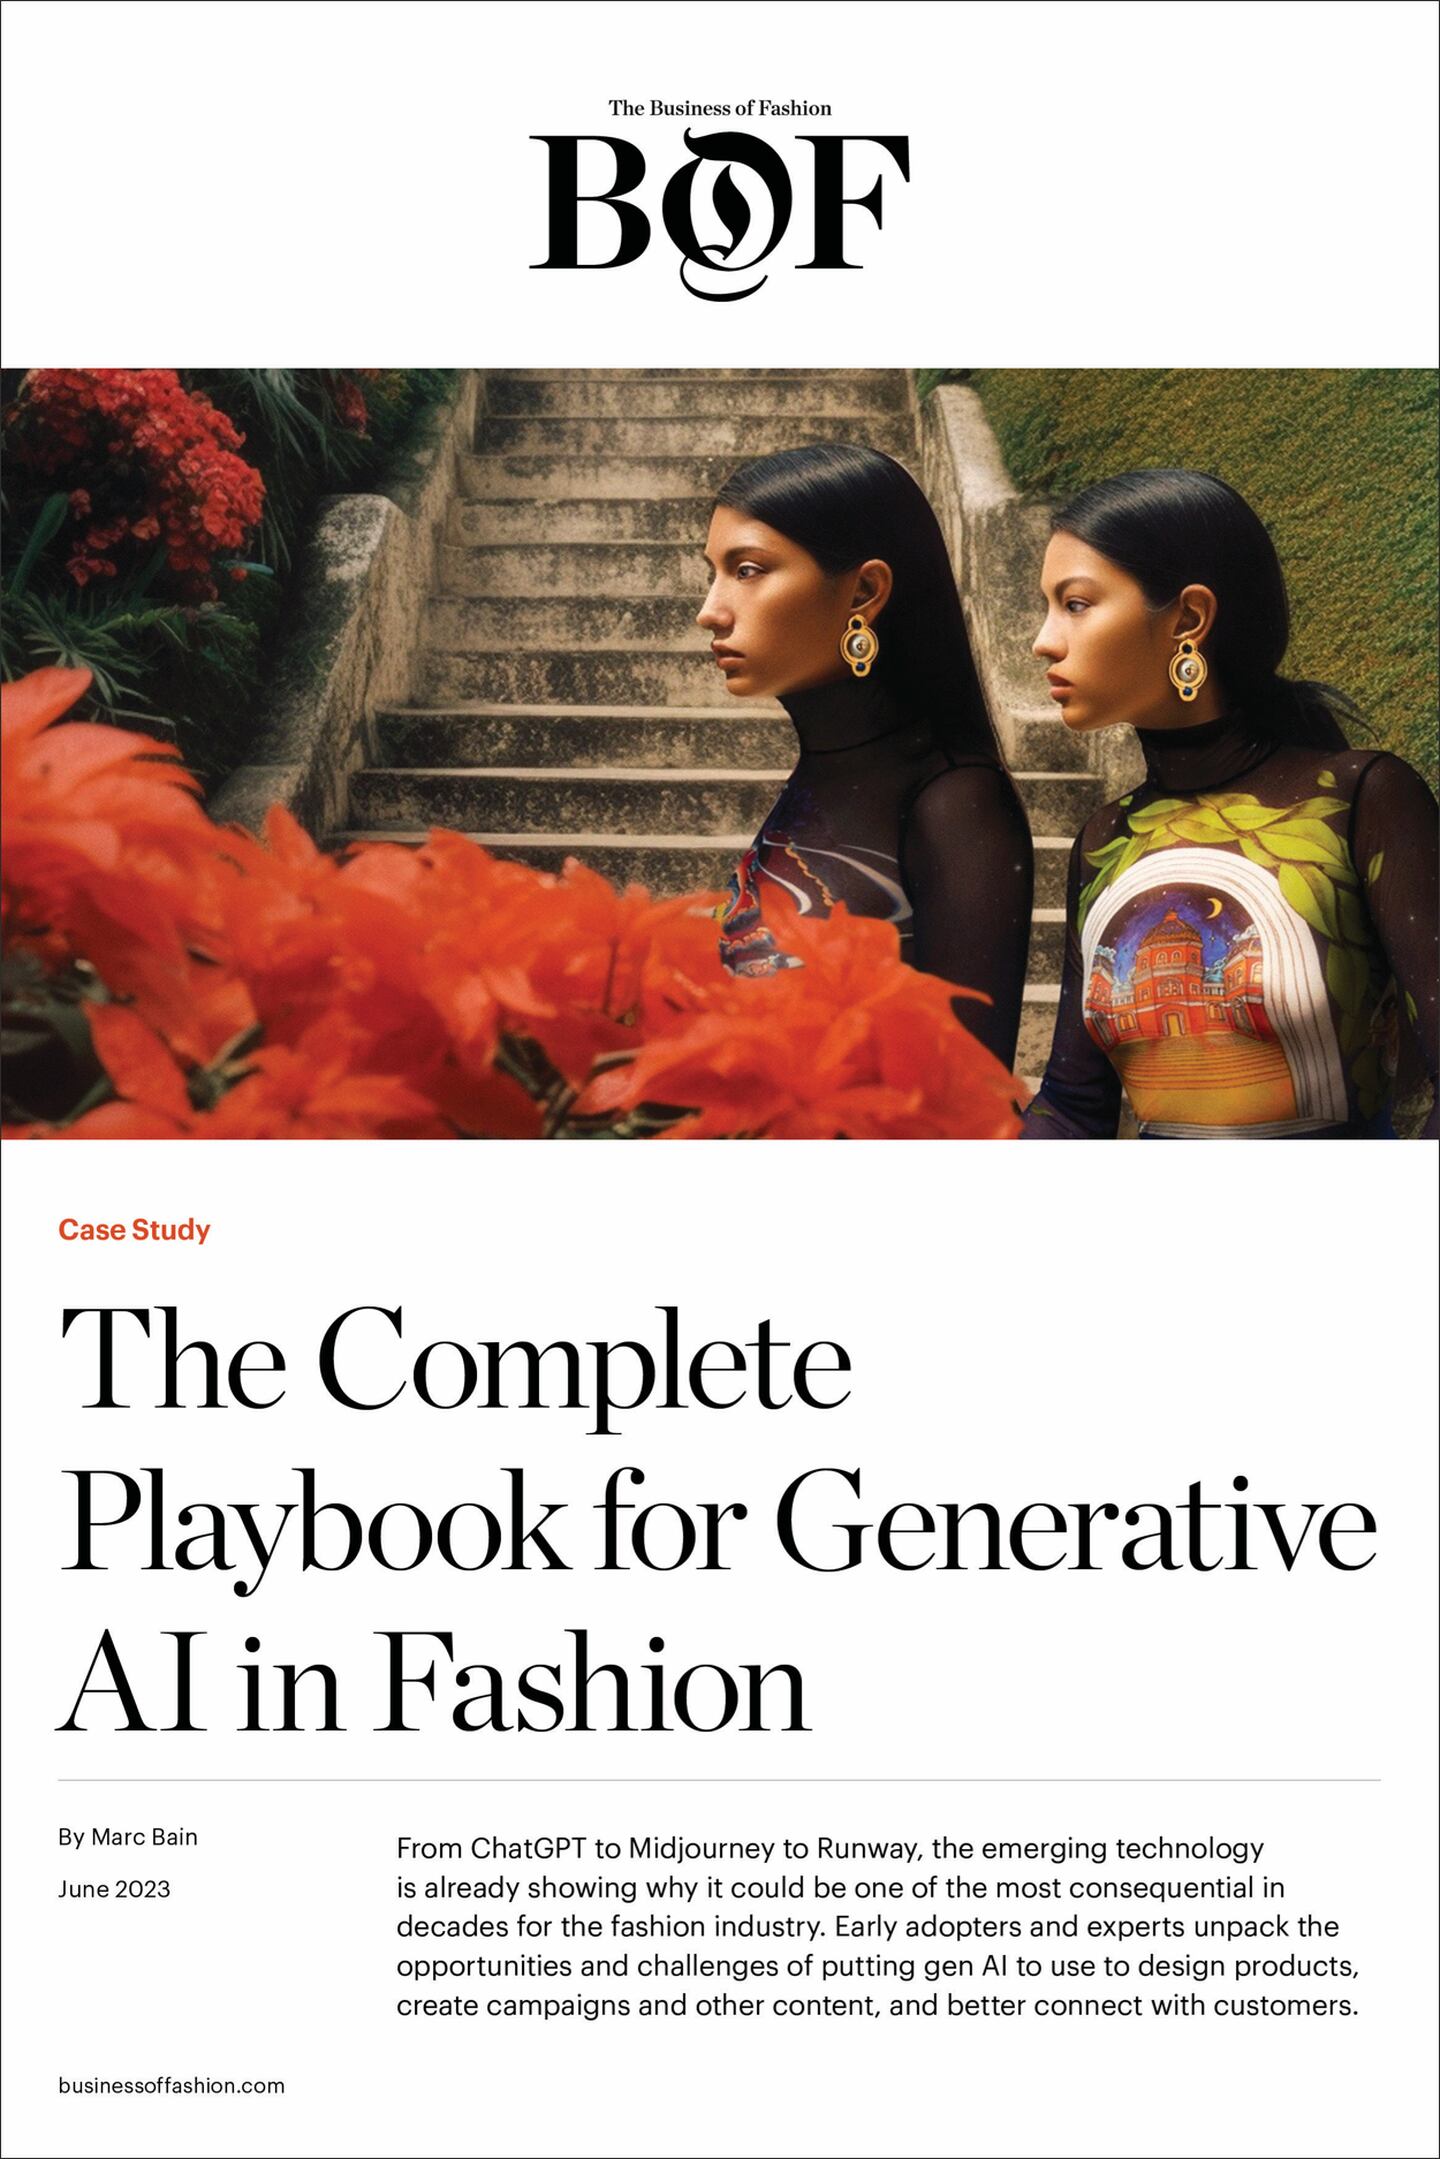 Cover for BoF's new case study, The Complete Playbook for Generative AI in Fashion